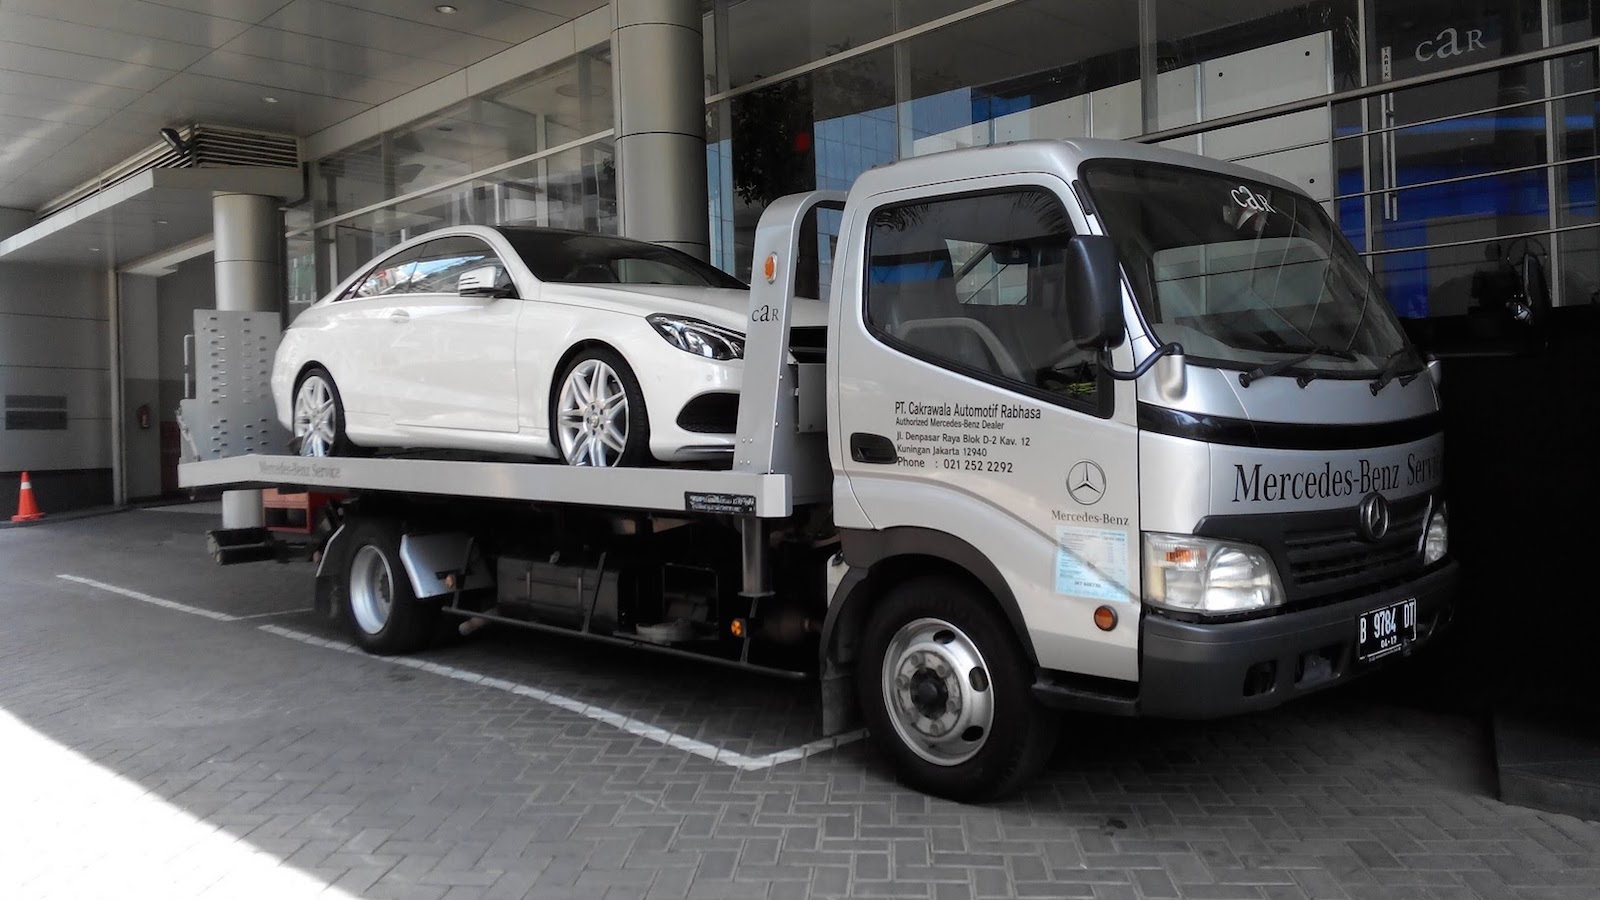 5 Things to Know About European Delivery of Your MercedesBenz Mbworld